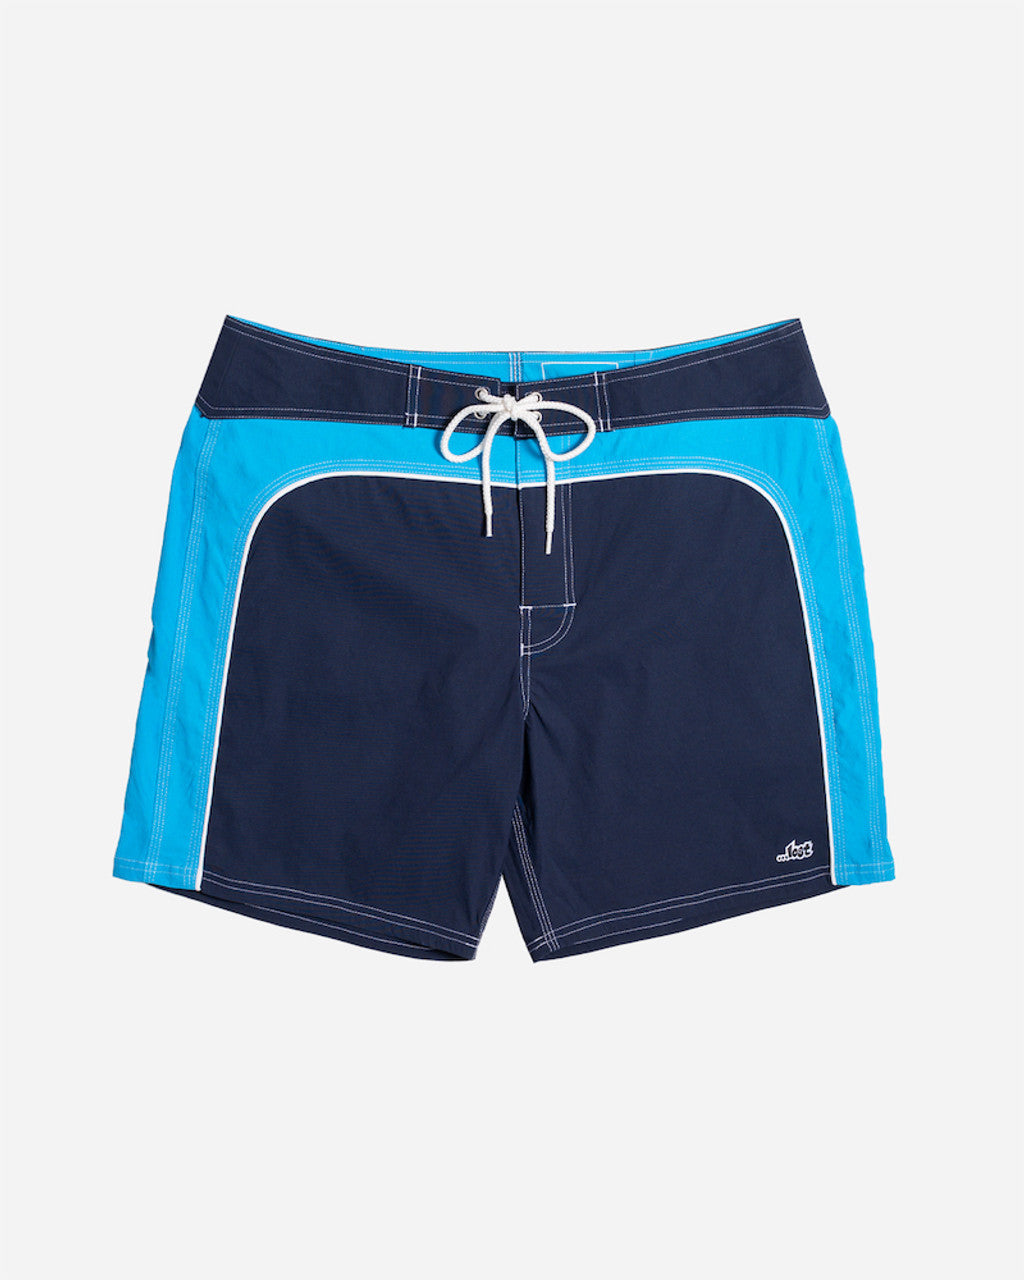 Lost Clothing Yesteryear Boardshort - Navy (Front)